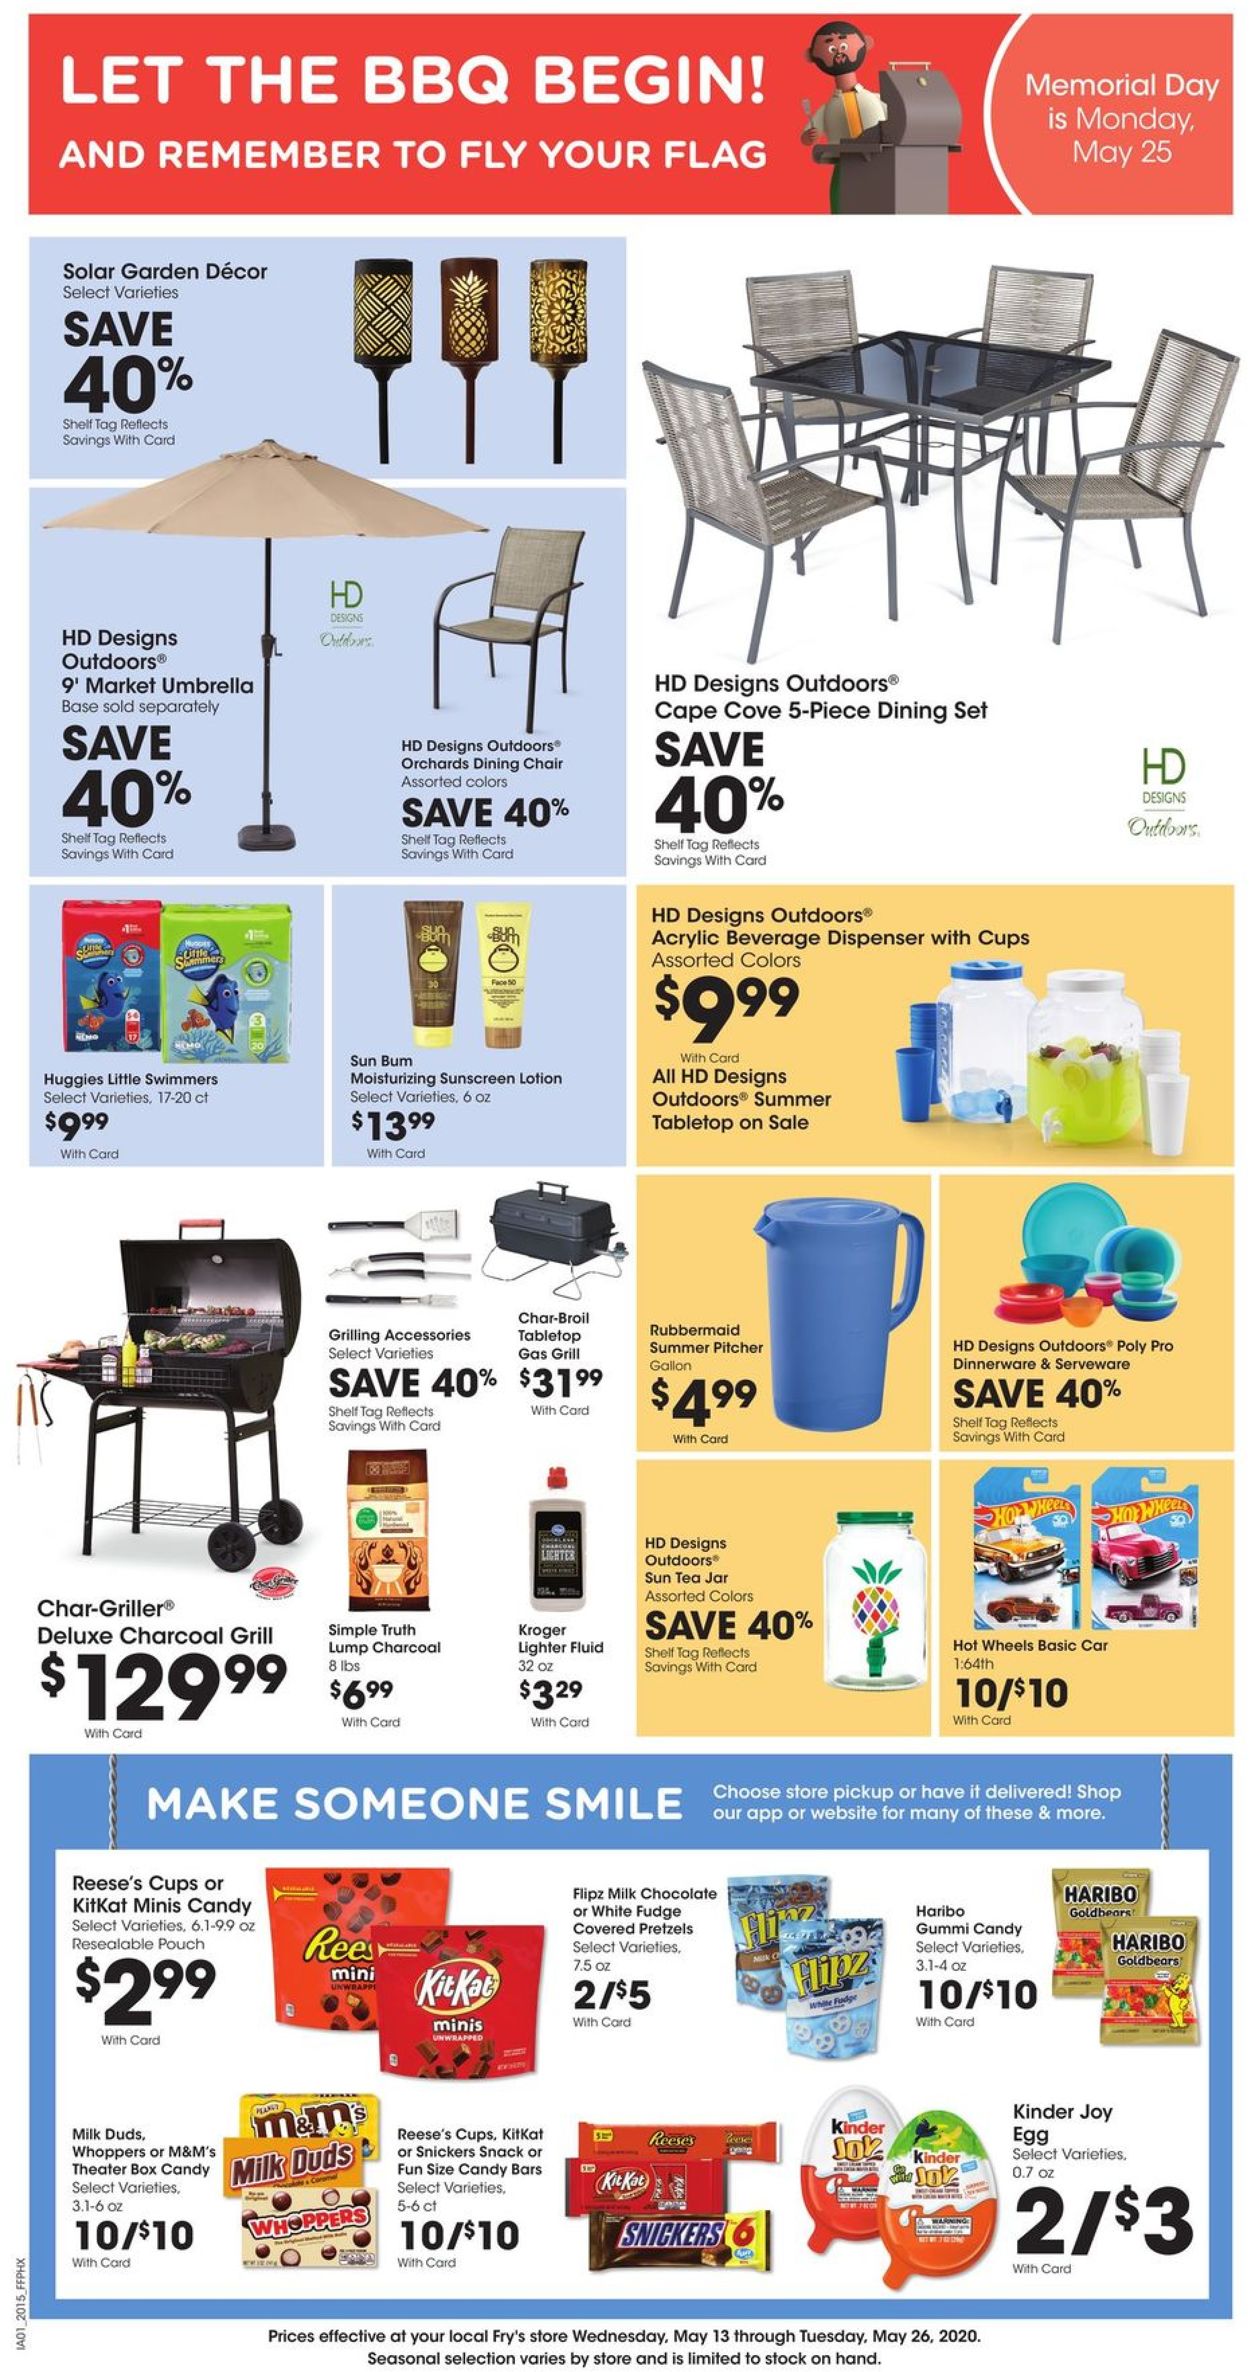 Fry’s Current weekly ad 05/13 - 05/19/2020 [7] - frequent-ads.com